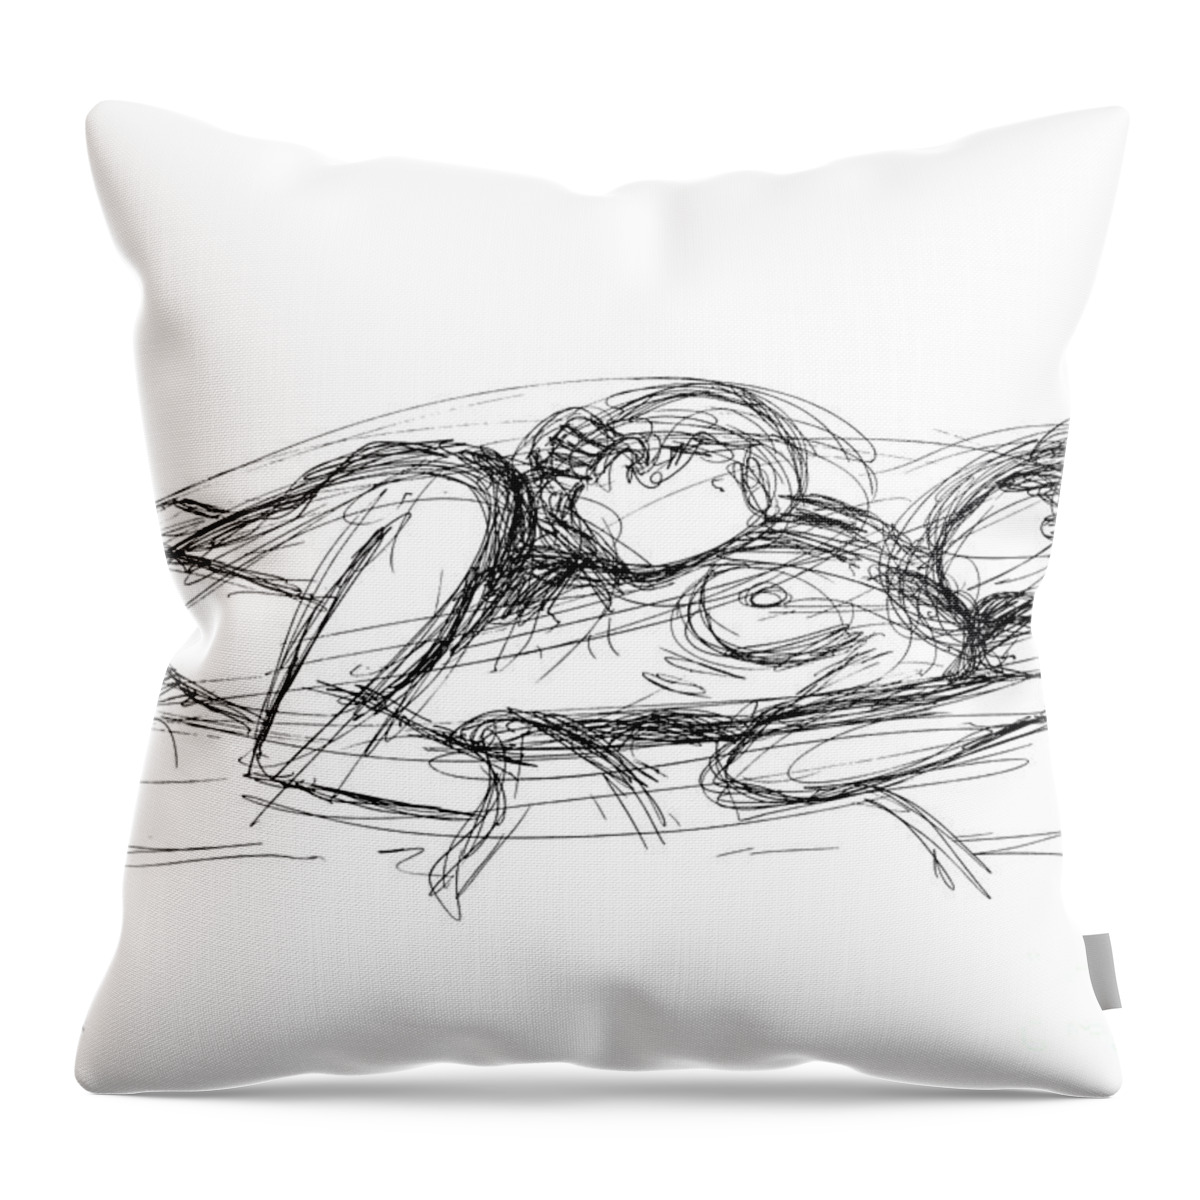 Couples Throw Pillow featuring the drawing Erotic Couple Sketches 7 by Gordon Punt